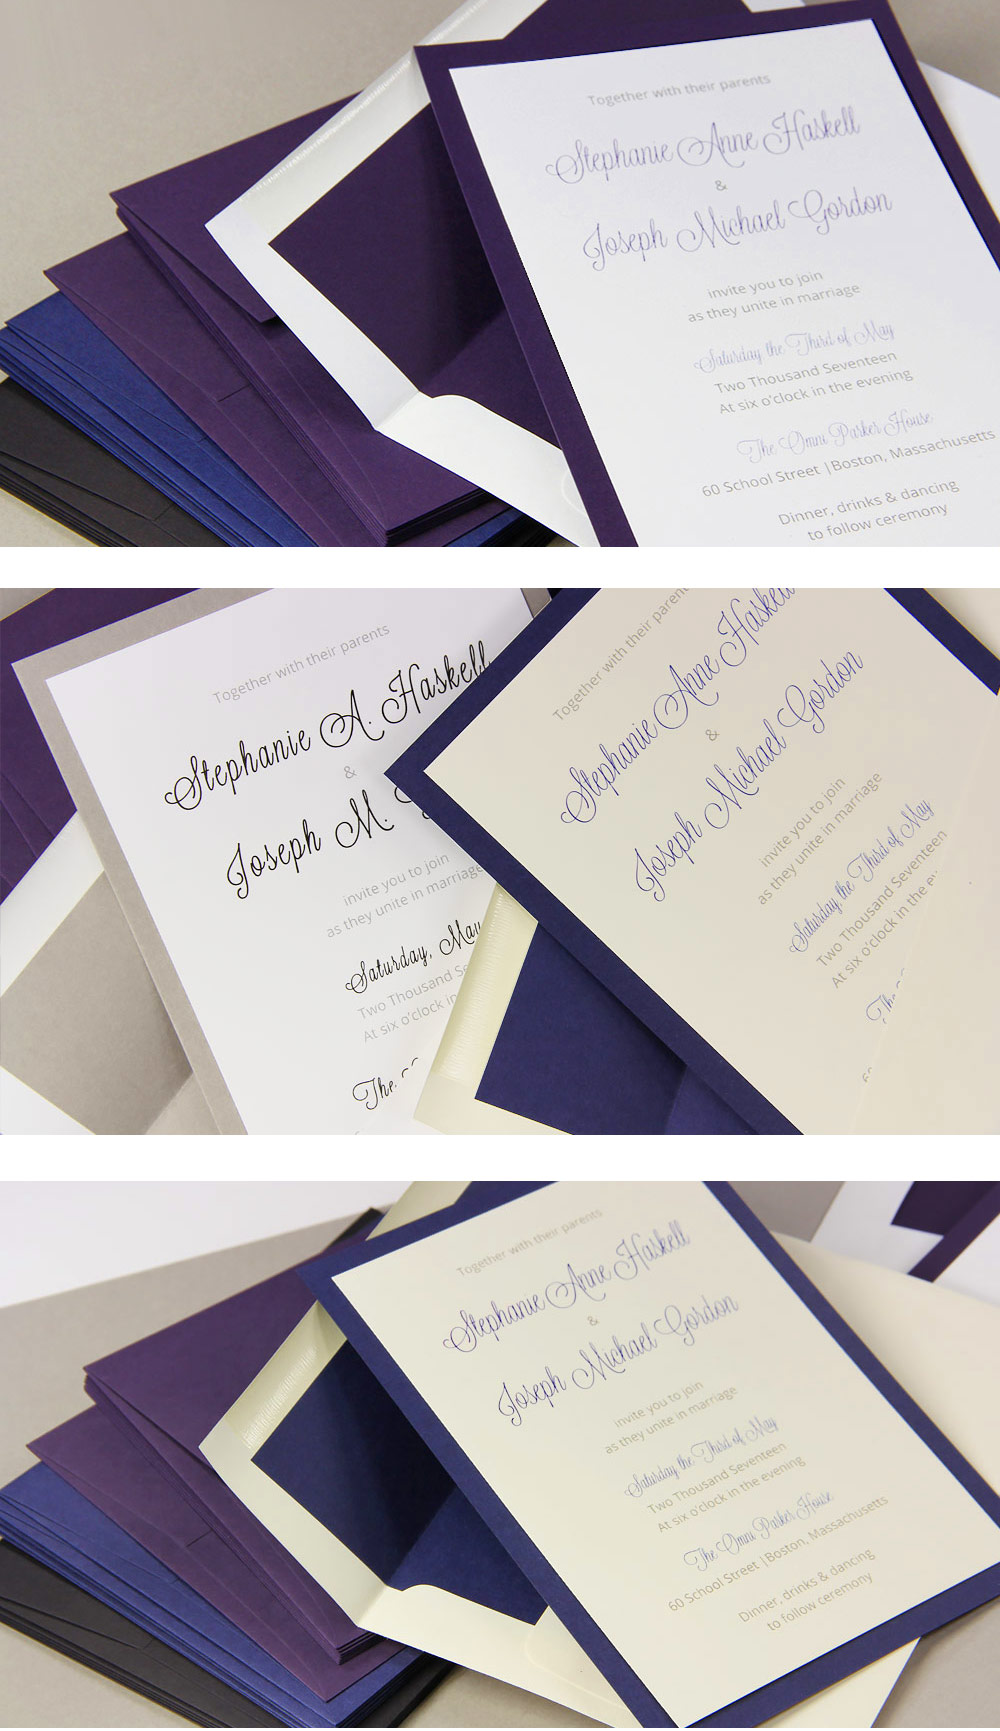 Layered 5 x 7 wedding invitations with matching lined envelopes